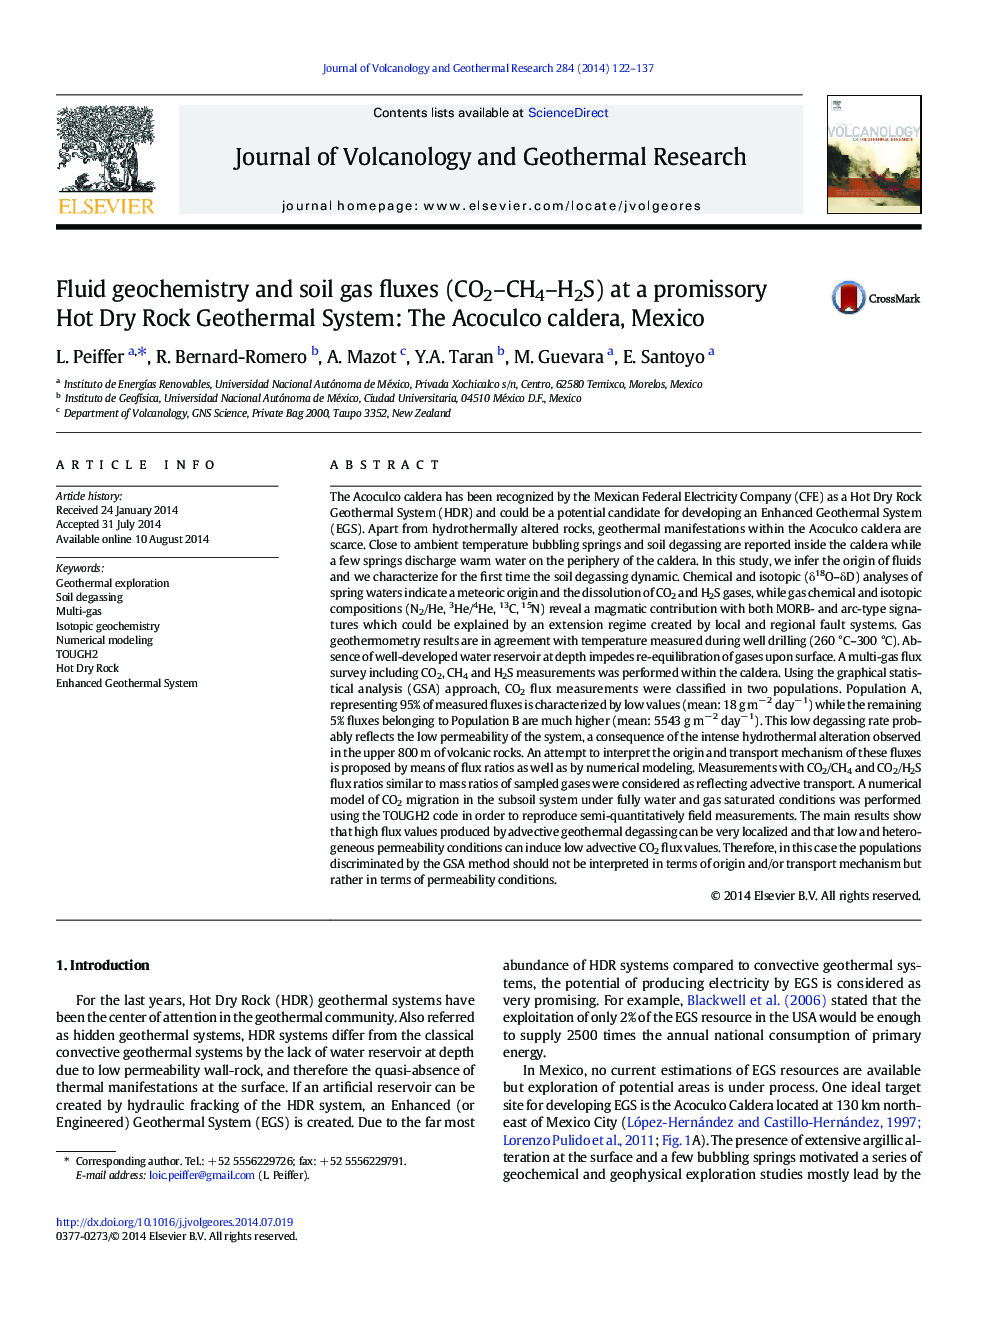 Fluid geochemistry and soil gas fluxes (CO2–CH4–H2S) at a promissory Hot Dry Rock Geothermal System: The Acoculco caldera, Mexico